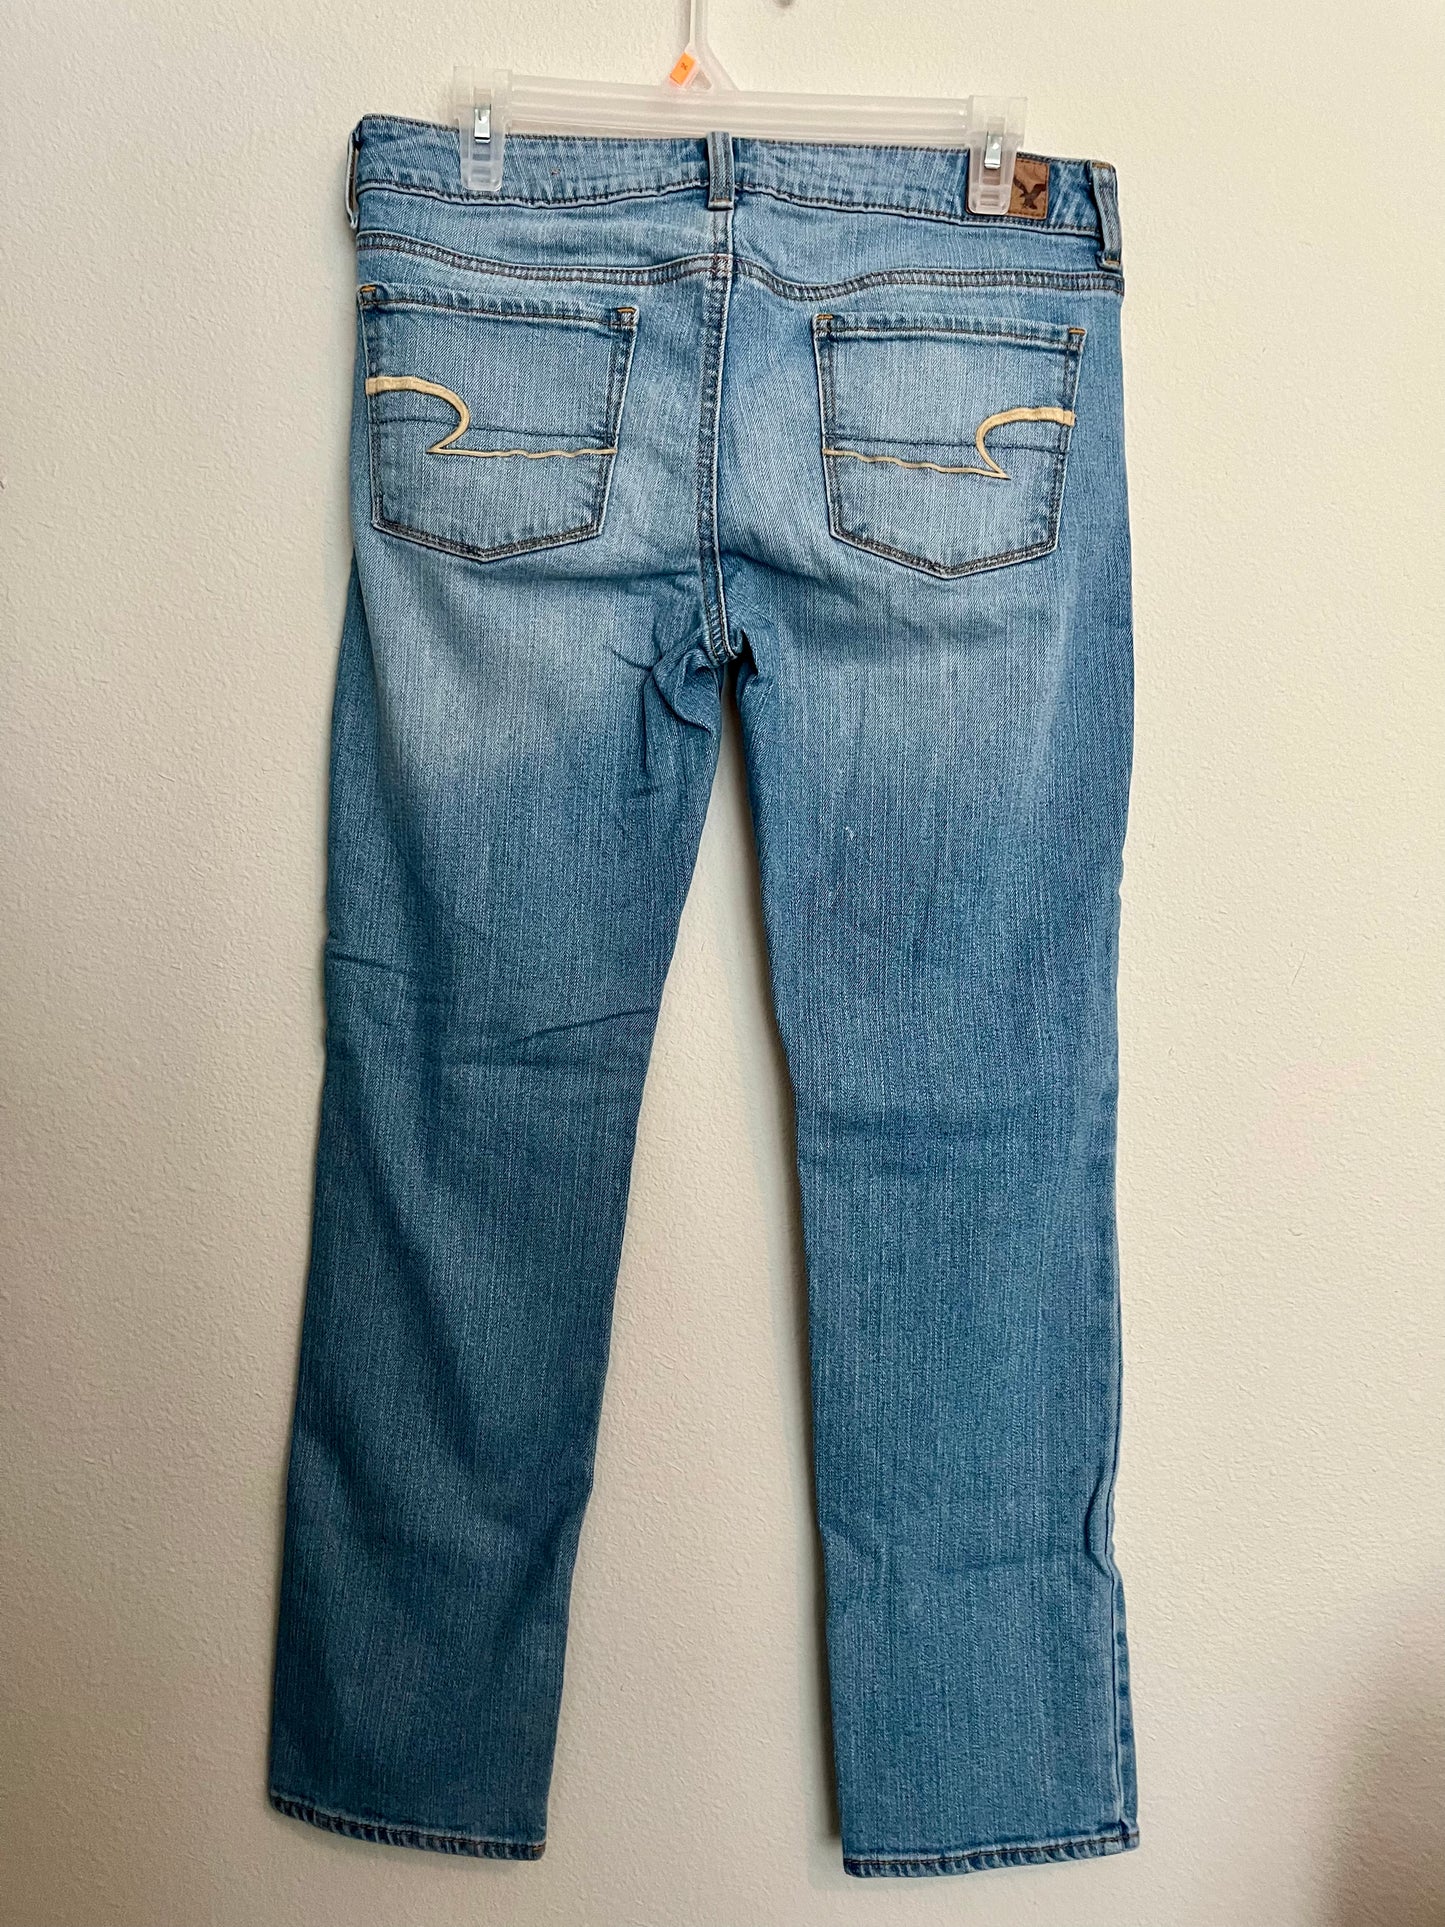 American Eagle Skinny Jeans, Size 8 Short - Tales from the Tangle